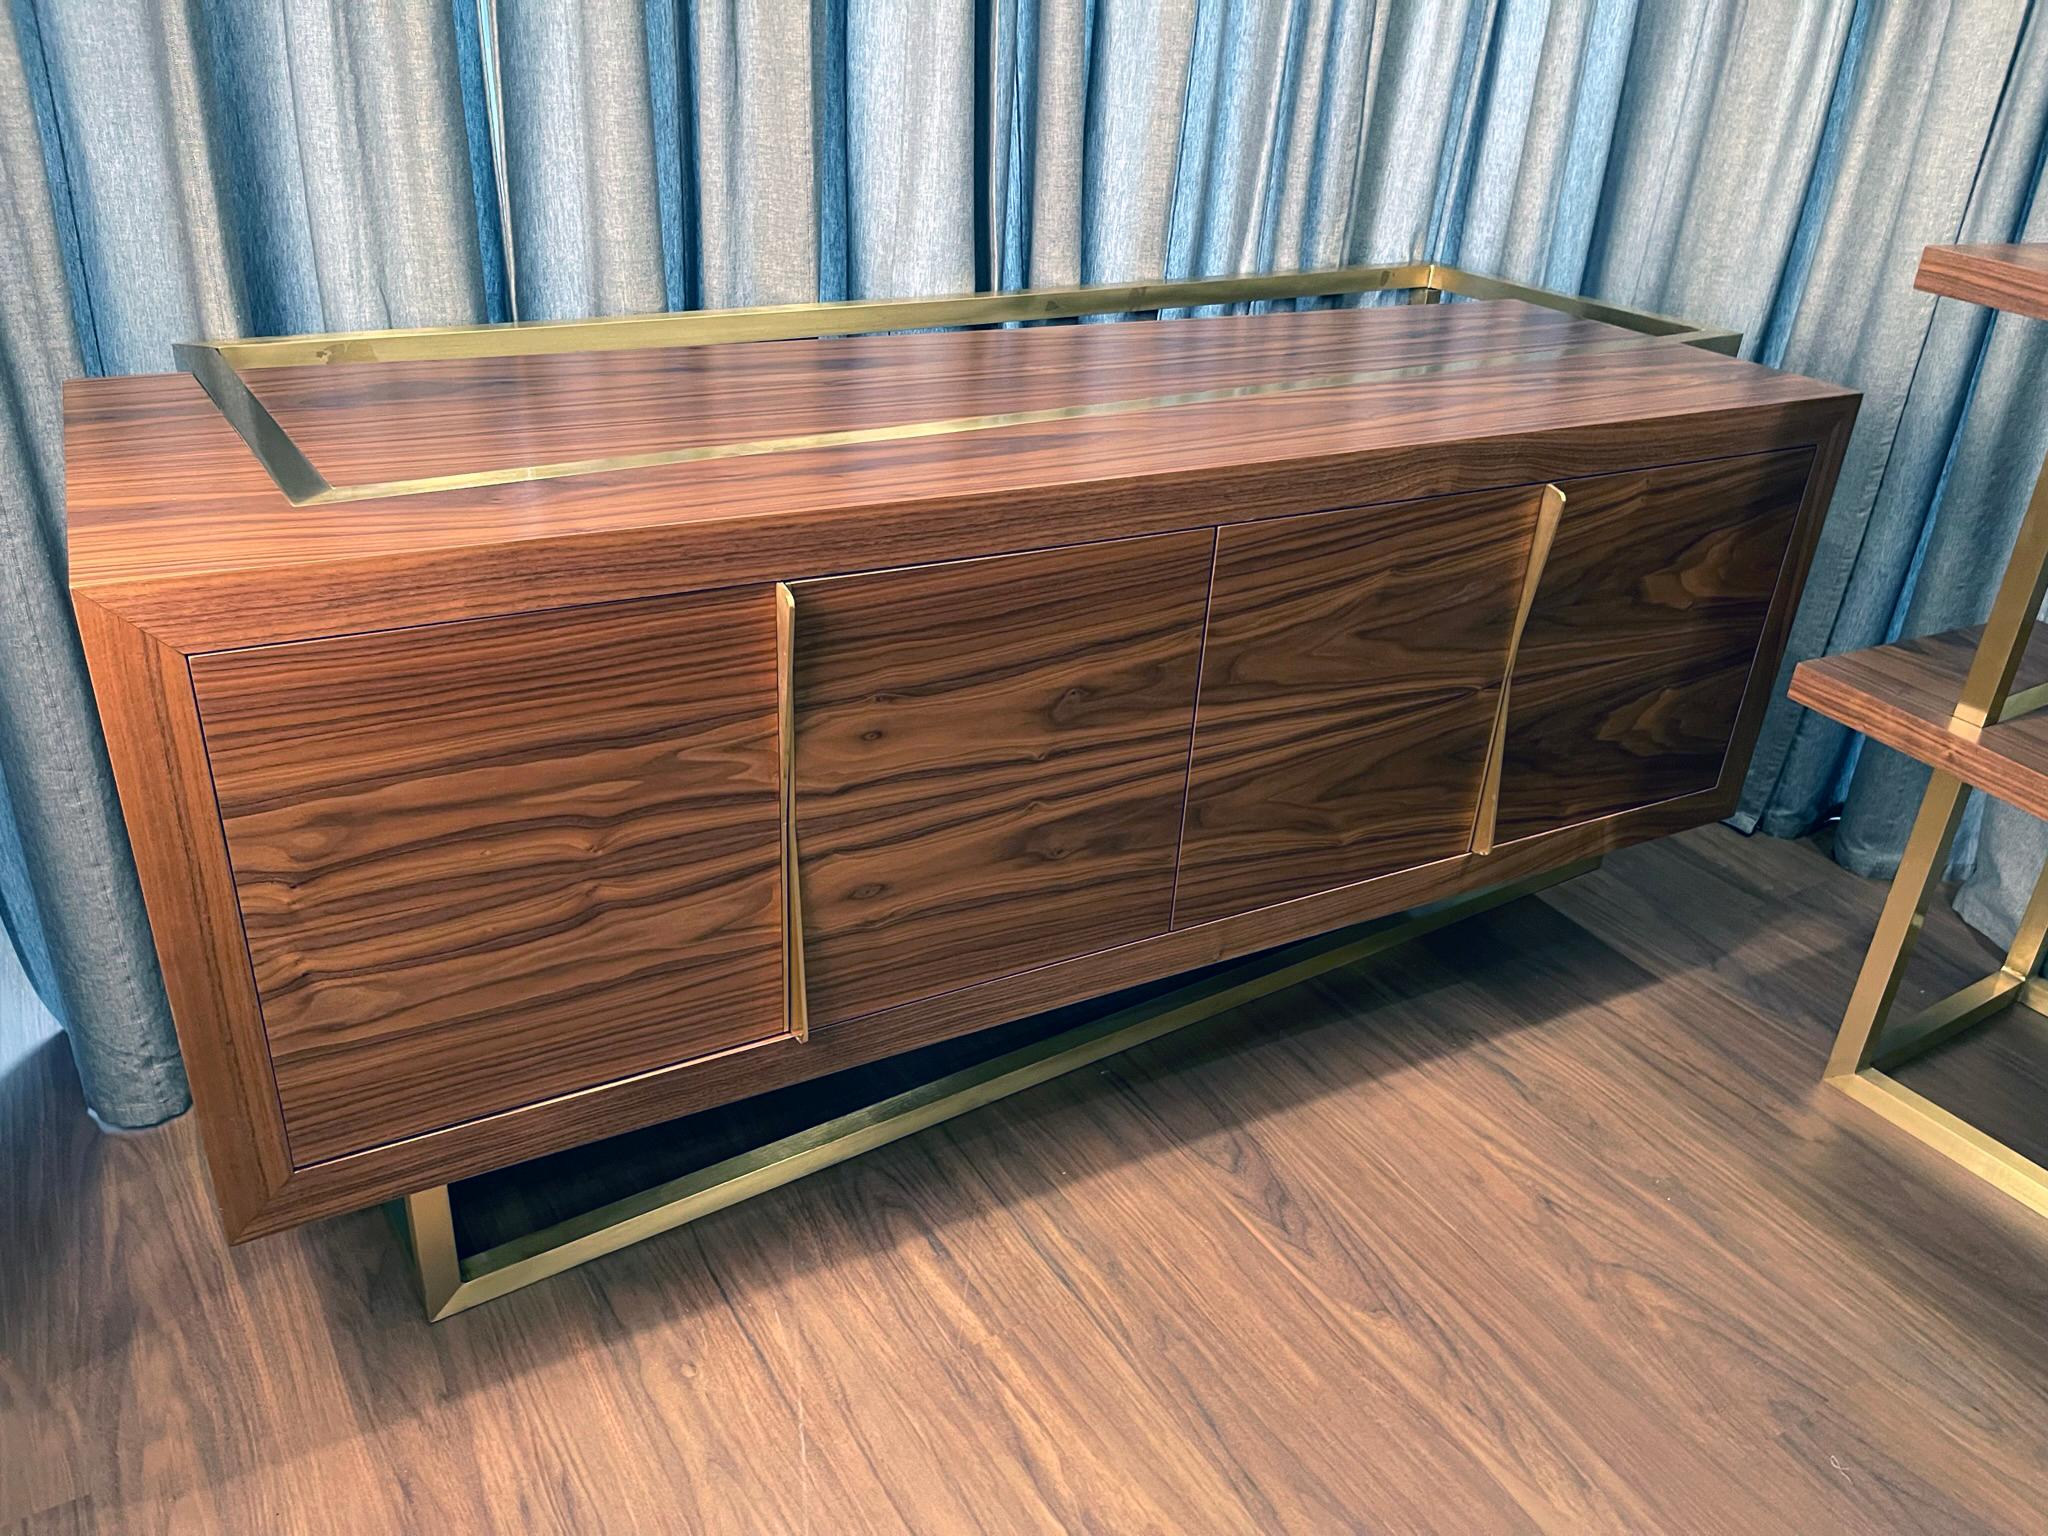 Portuguese 21st Century Modern Credenza Sideboard in Walnut and Brass Showroom Sample